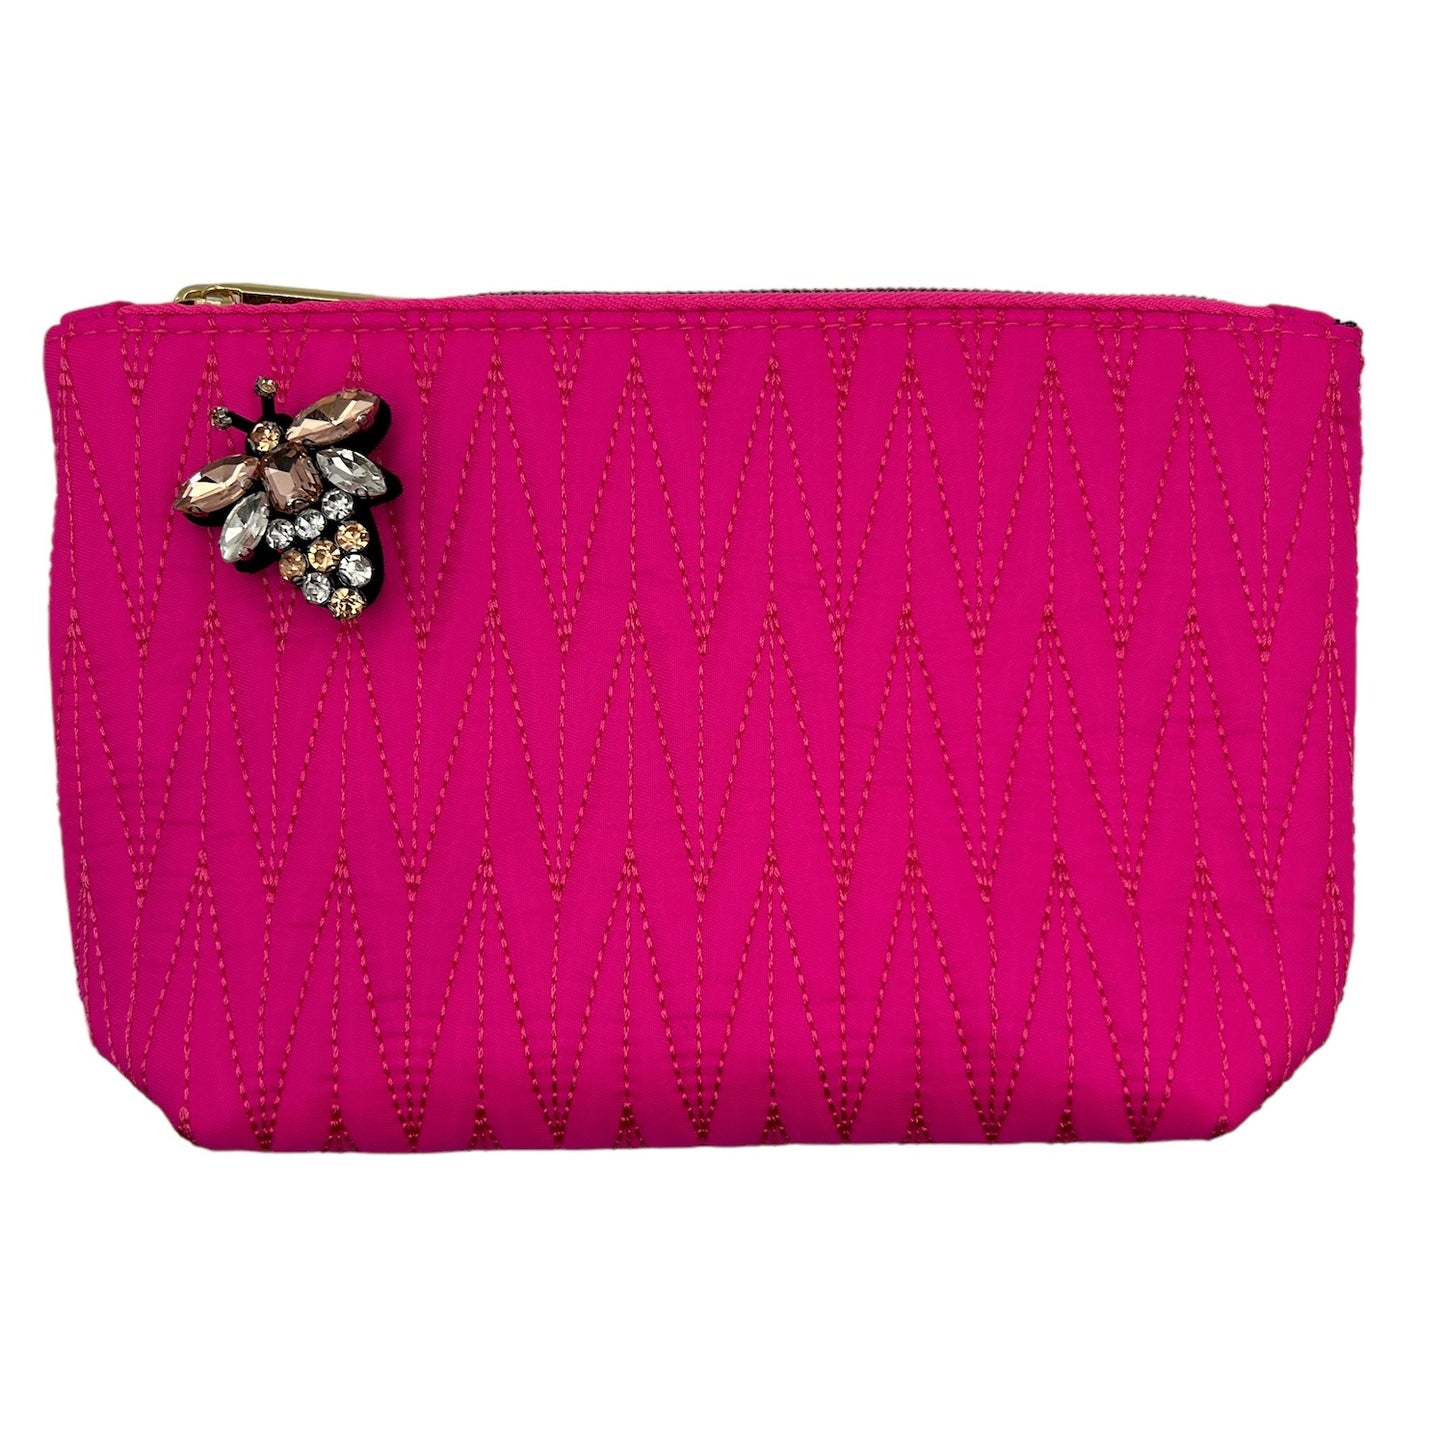 Bright pink Tribeca make up bag with a queen bee pin